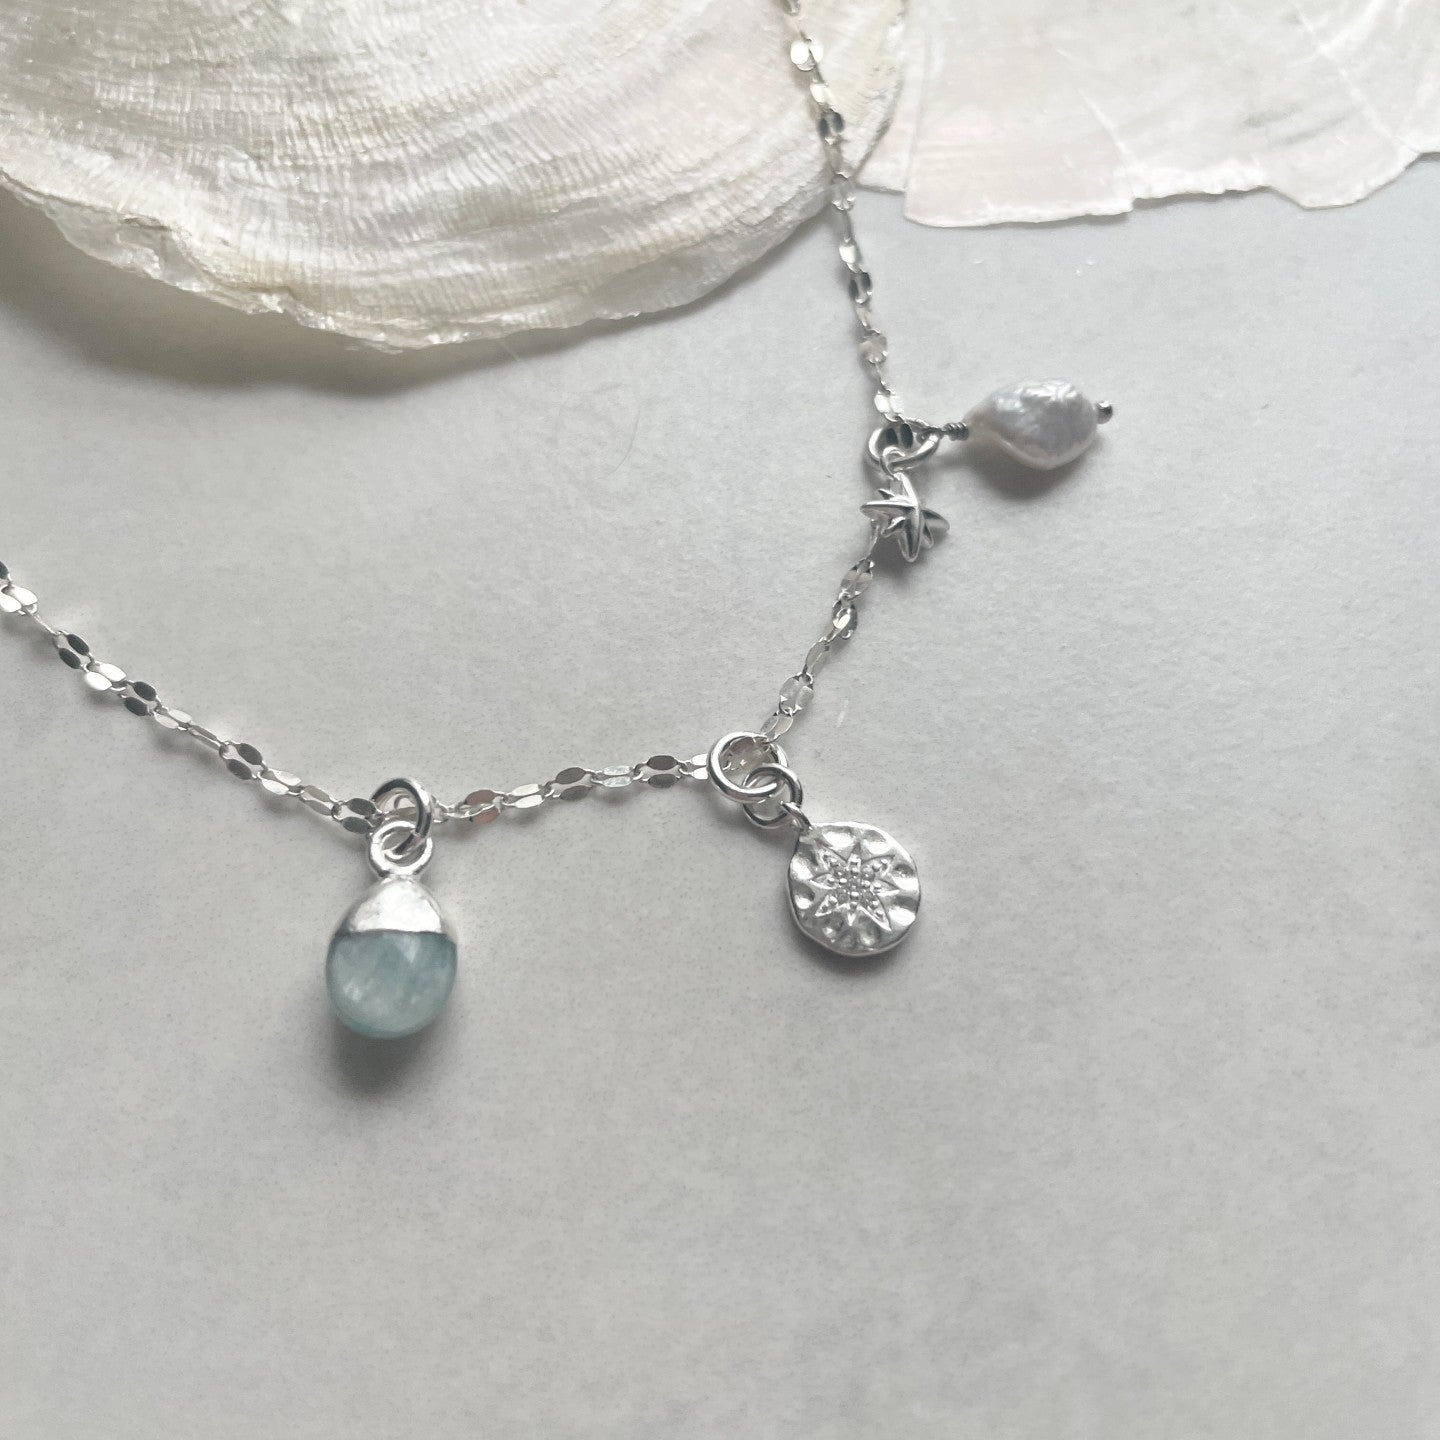 Aquamarine Charm Necklace | Serenity (Sterling Silver)